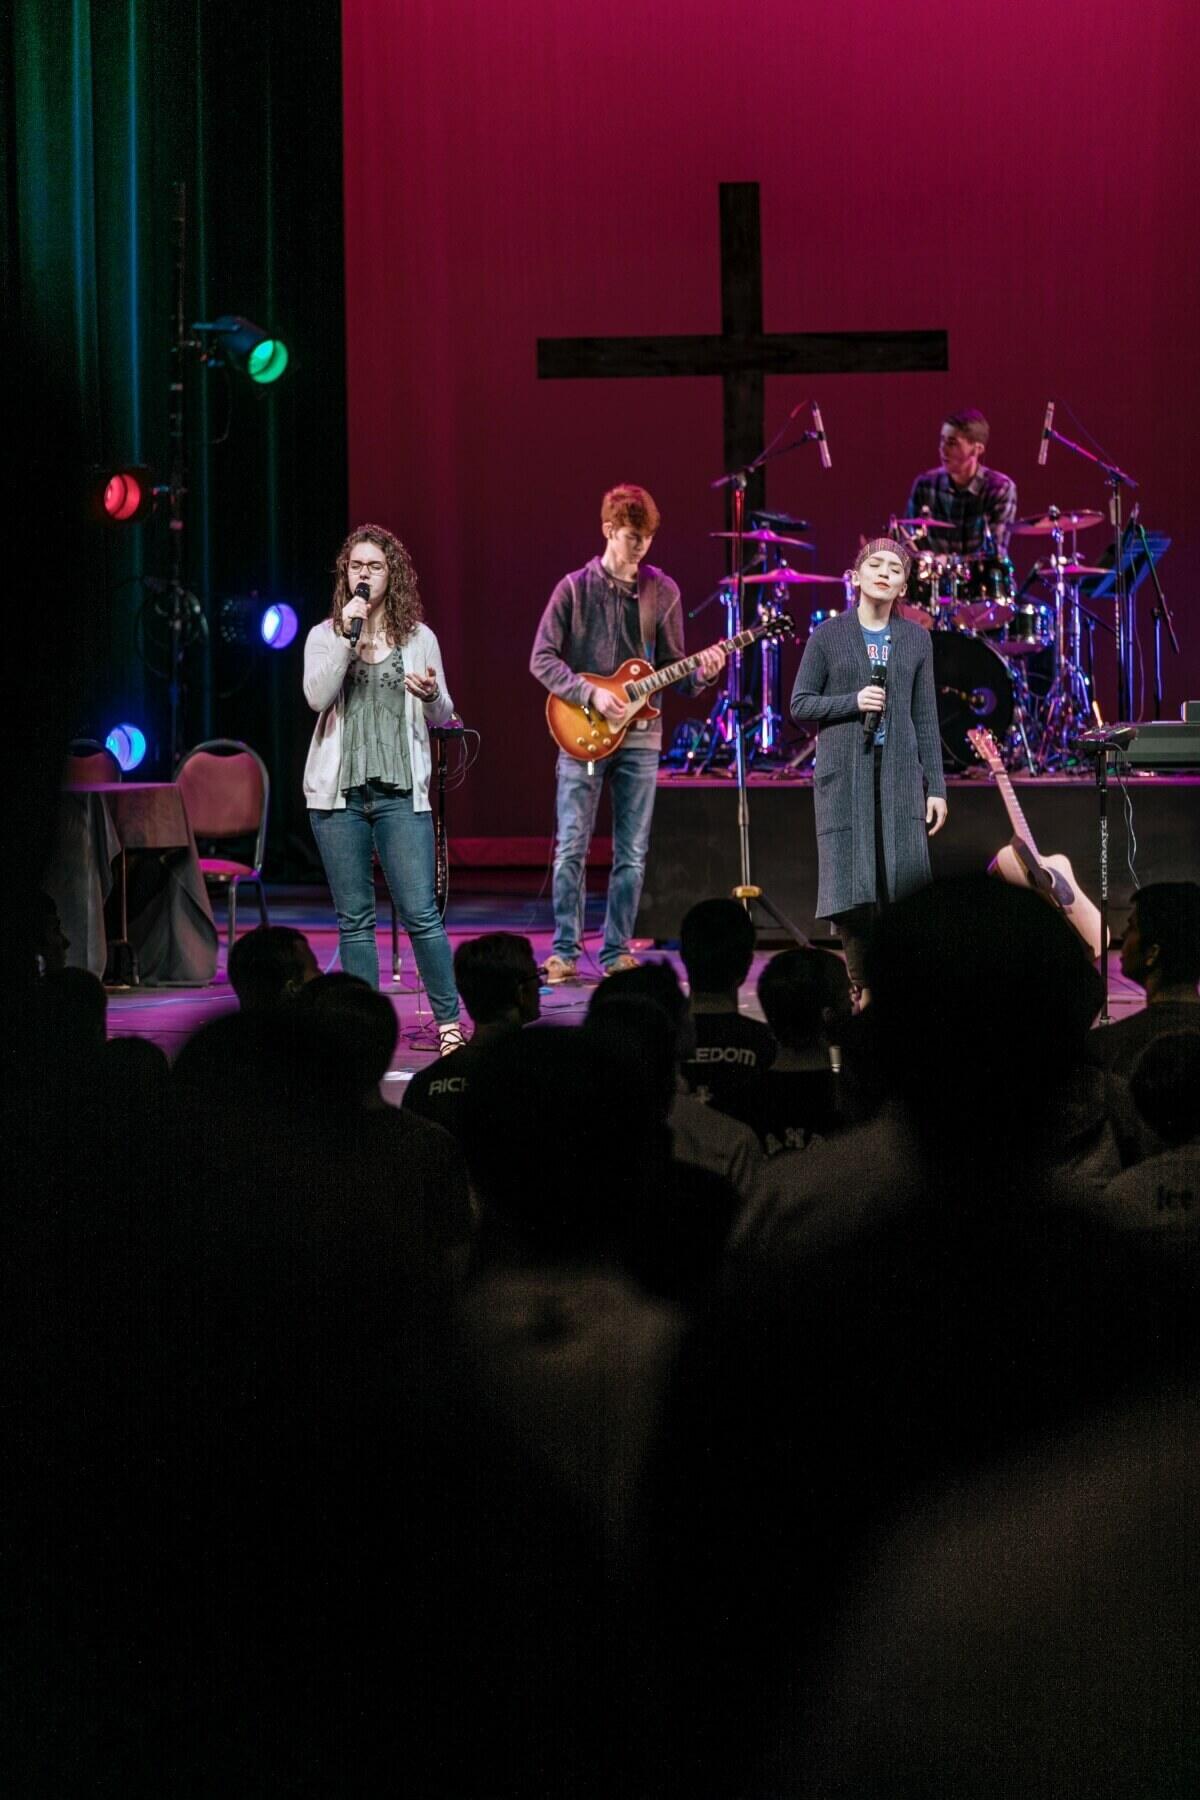 The chapel band leads worship.